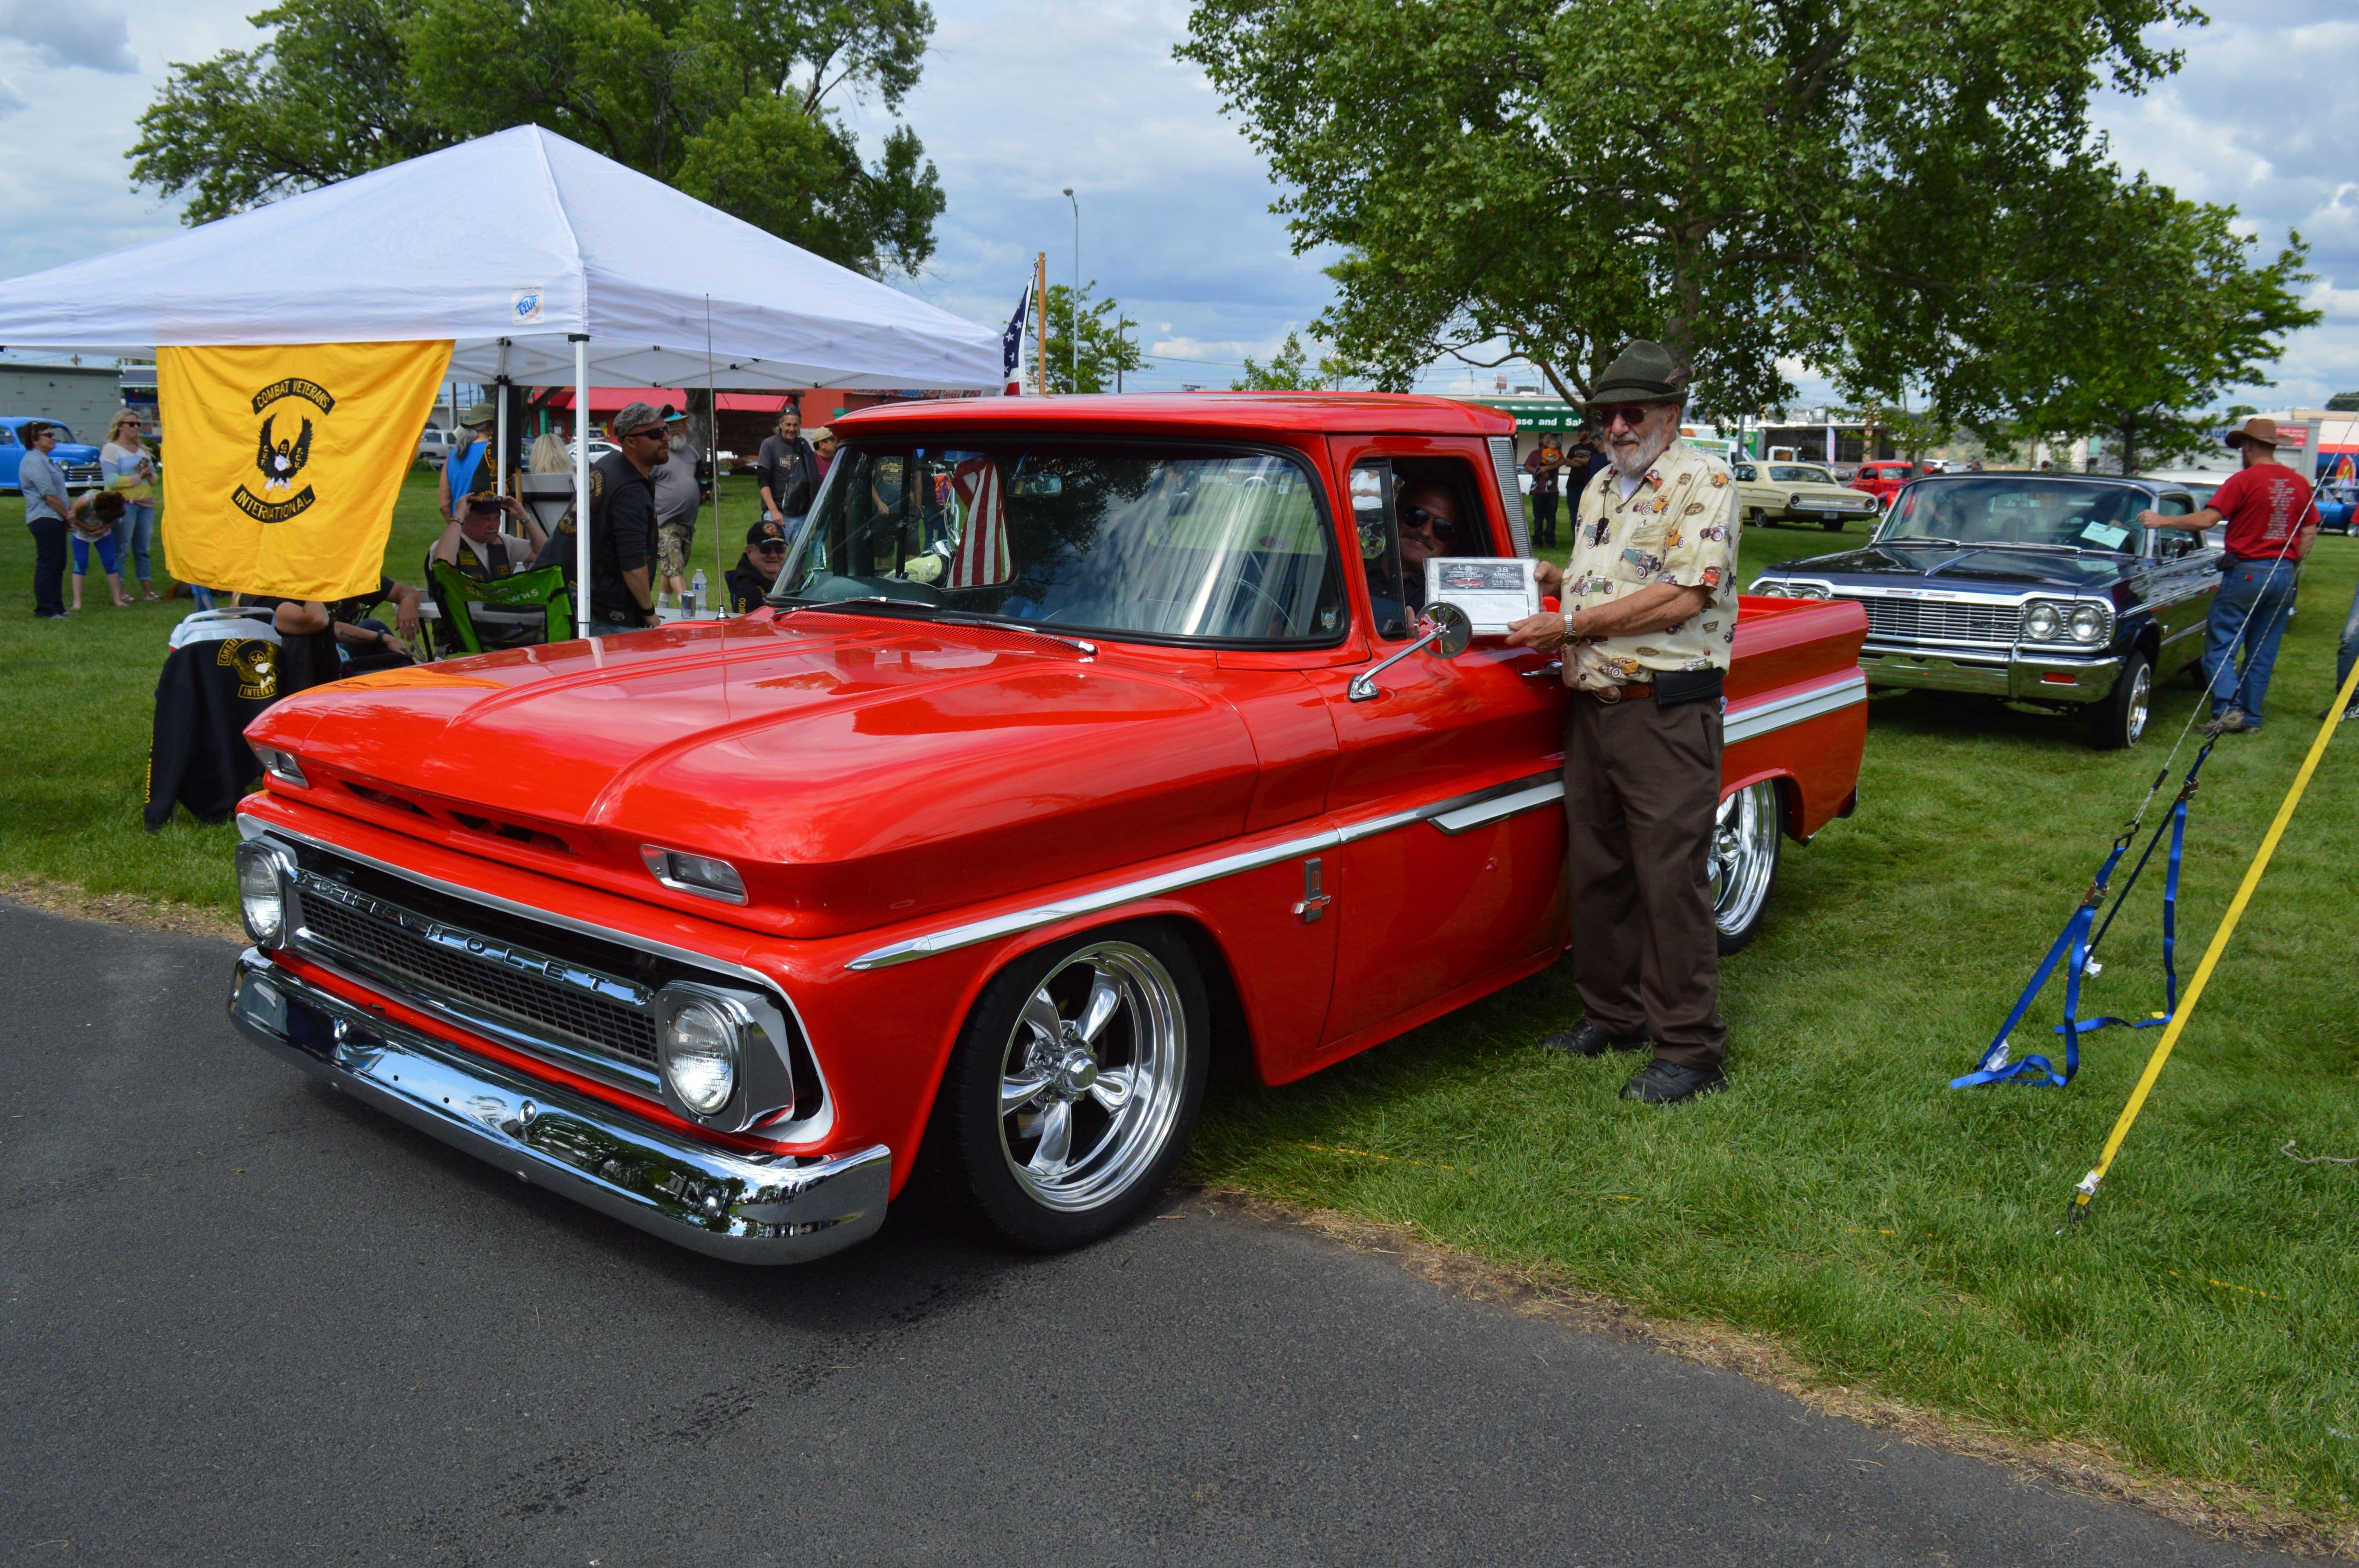 1963 Chevy C-10 - Stock Trk All Years - Larry Heller